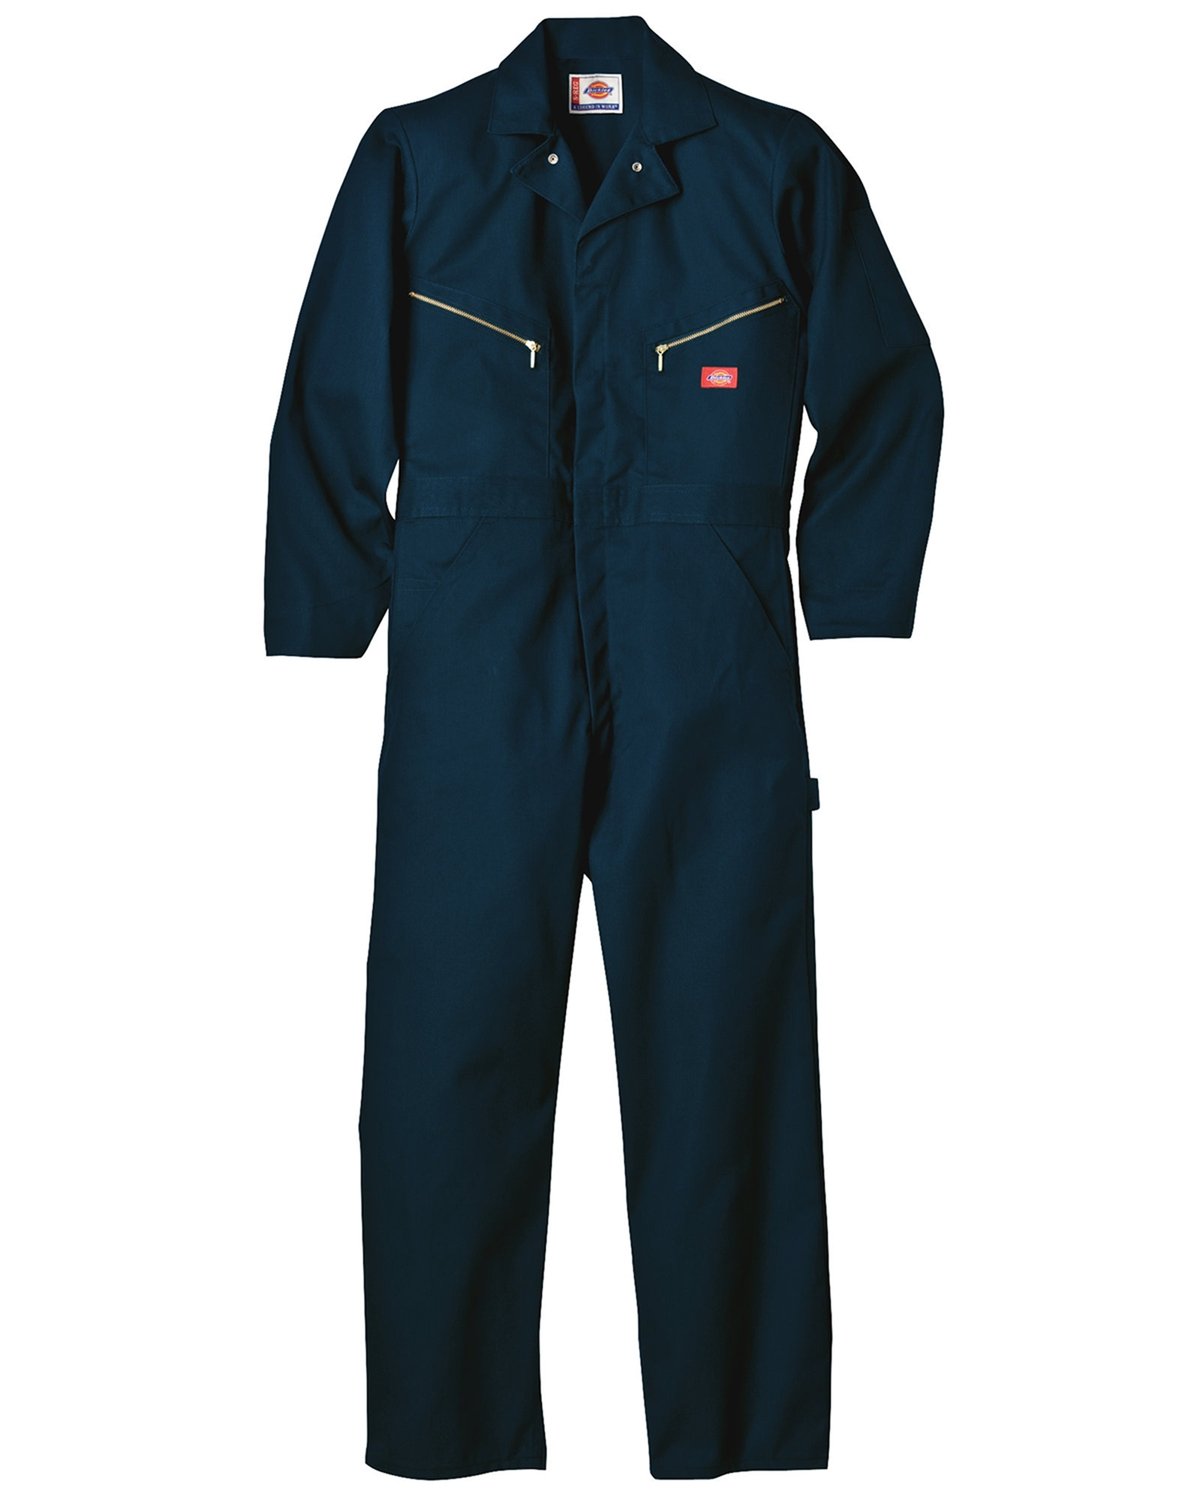 Dickies Workwear 48799 7.5 oz. Deluxe Coverall - Blended DK NAVY _XL ...